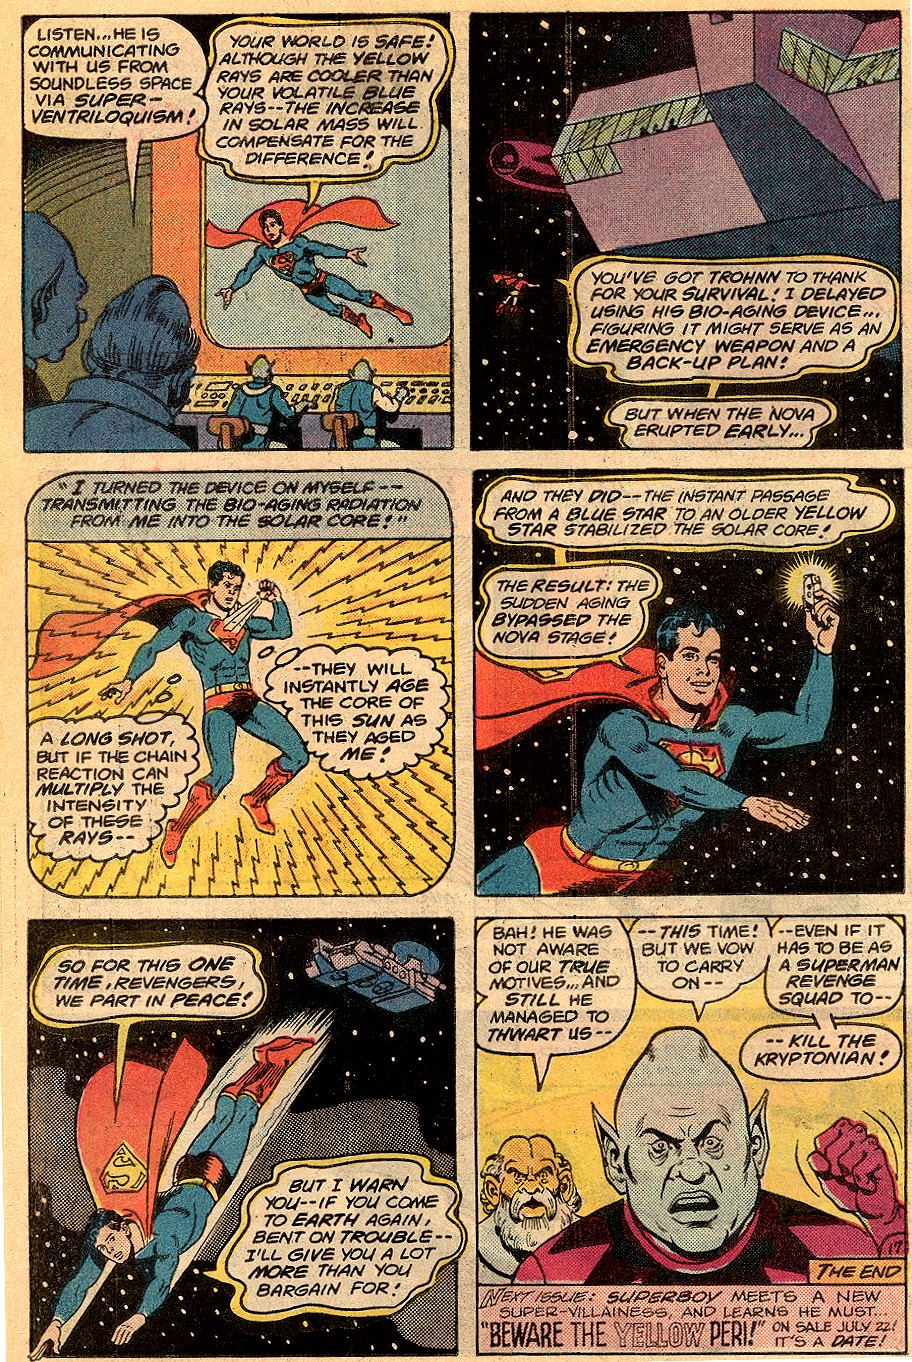 The New Adventures of Superboy 33 Page 21